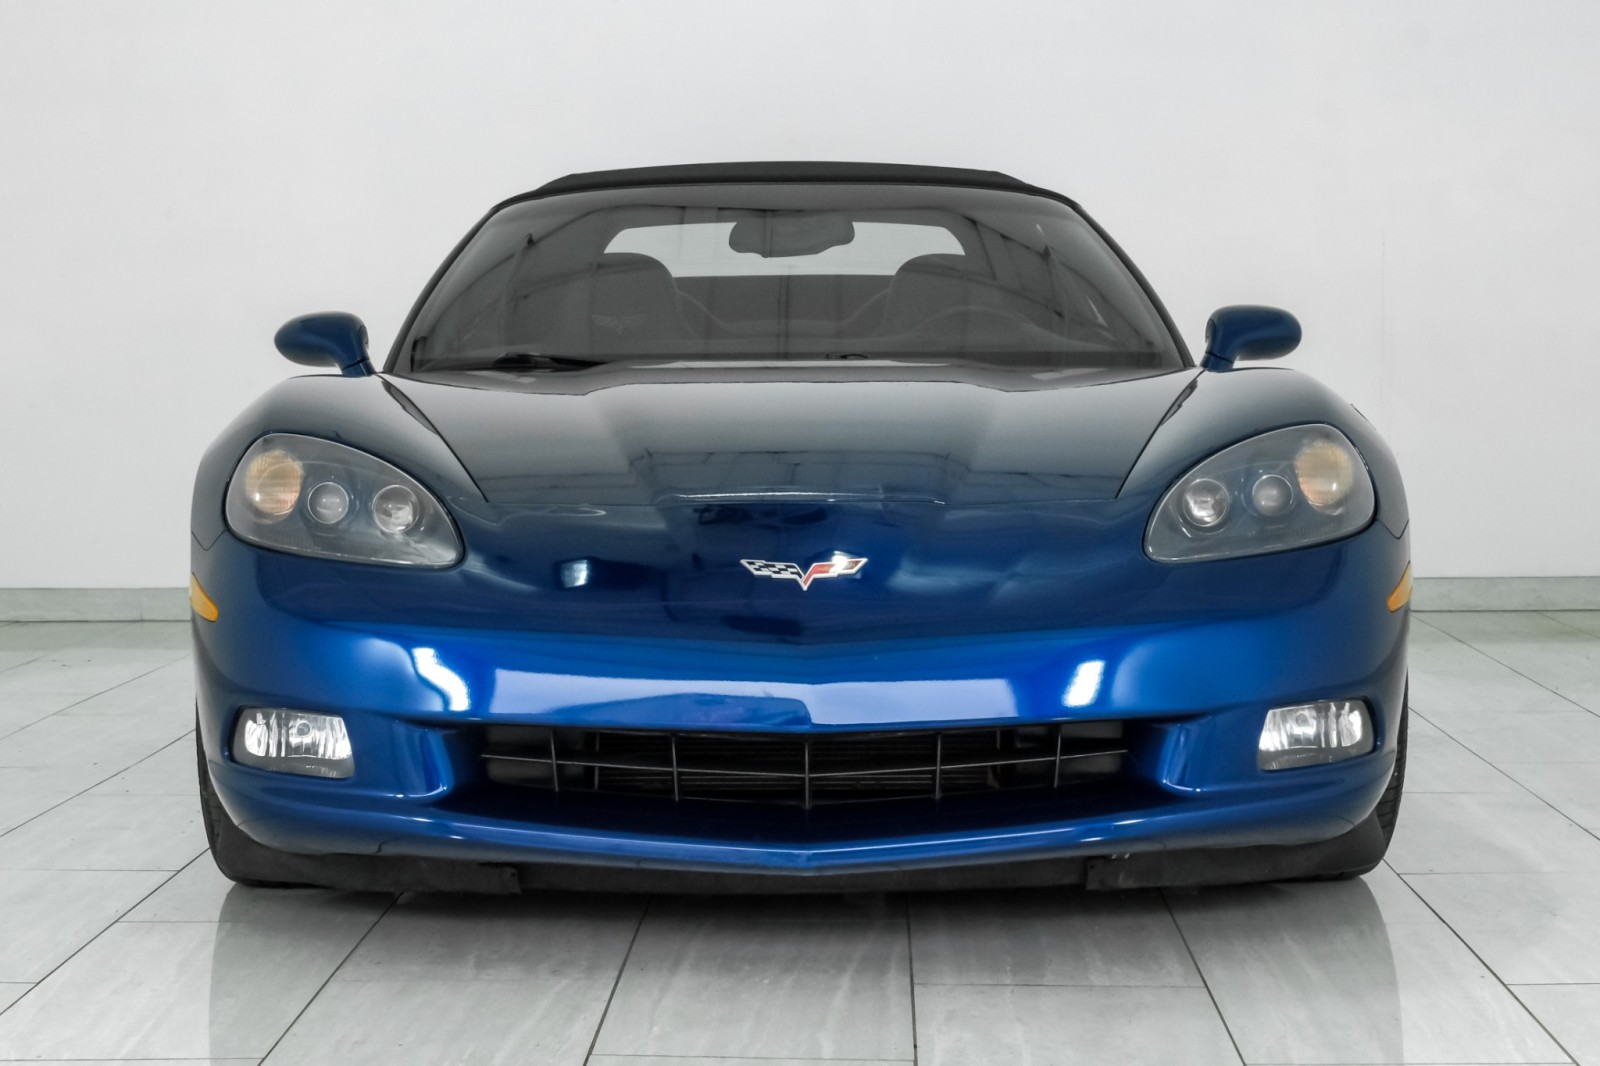 2007 Chevrolet Corvette Convertible AUTOMATIC NAVIGATION HEADUP DISPLAY LEATHER HEATED 6